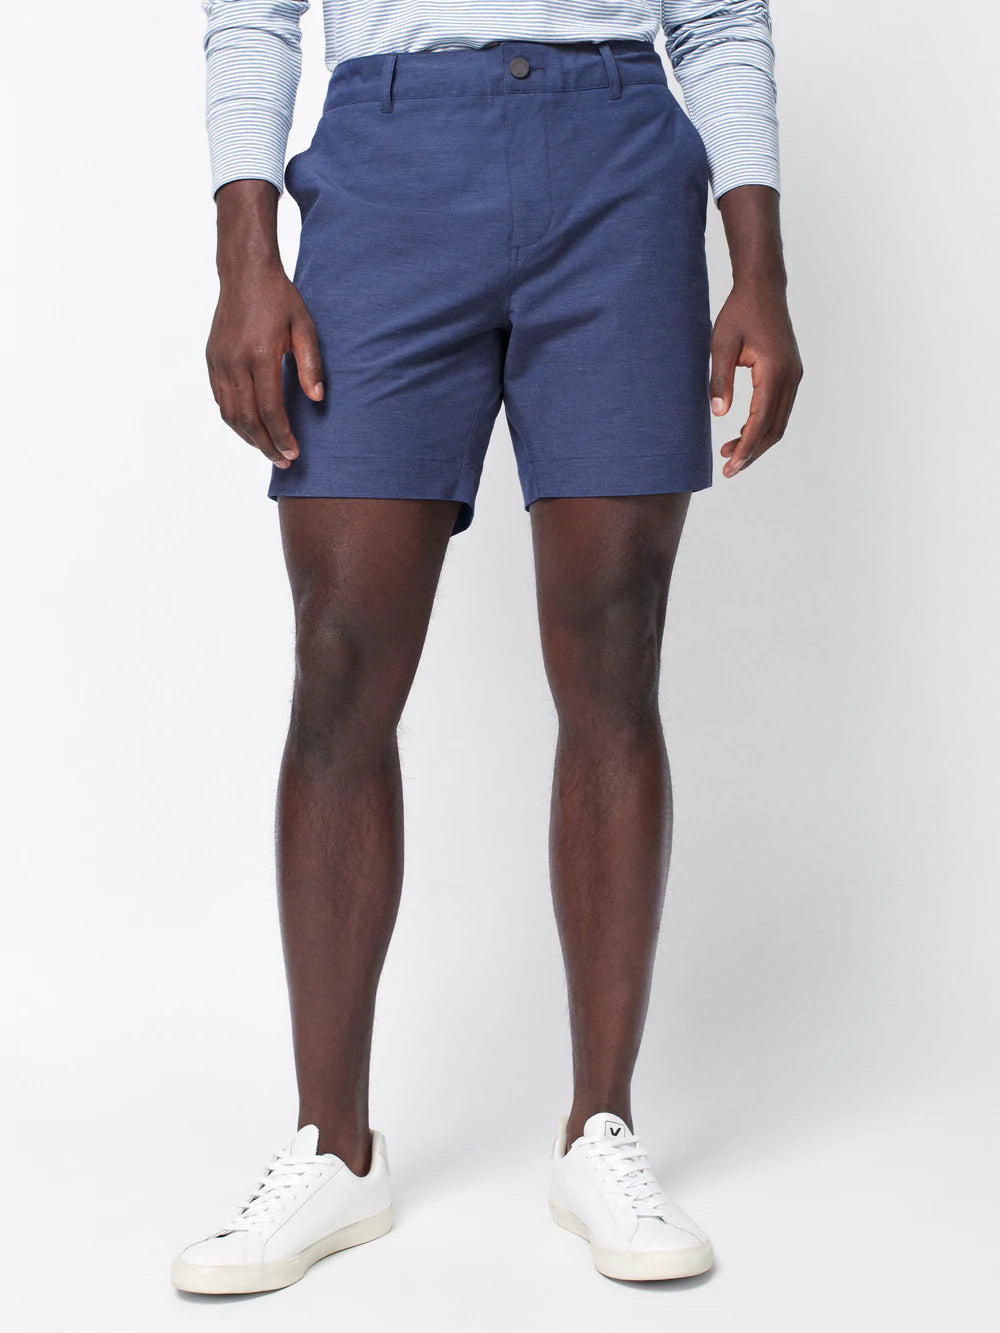 Belt Loop All Day Shorts